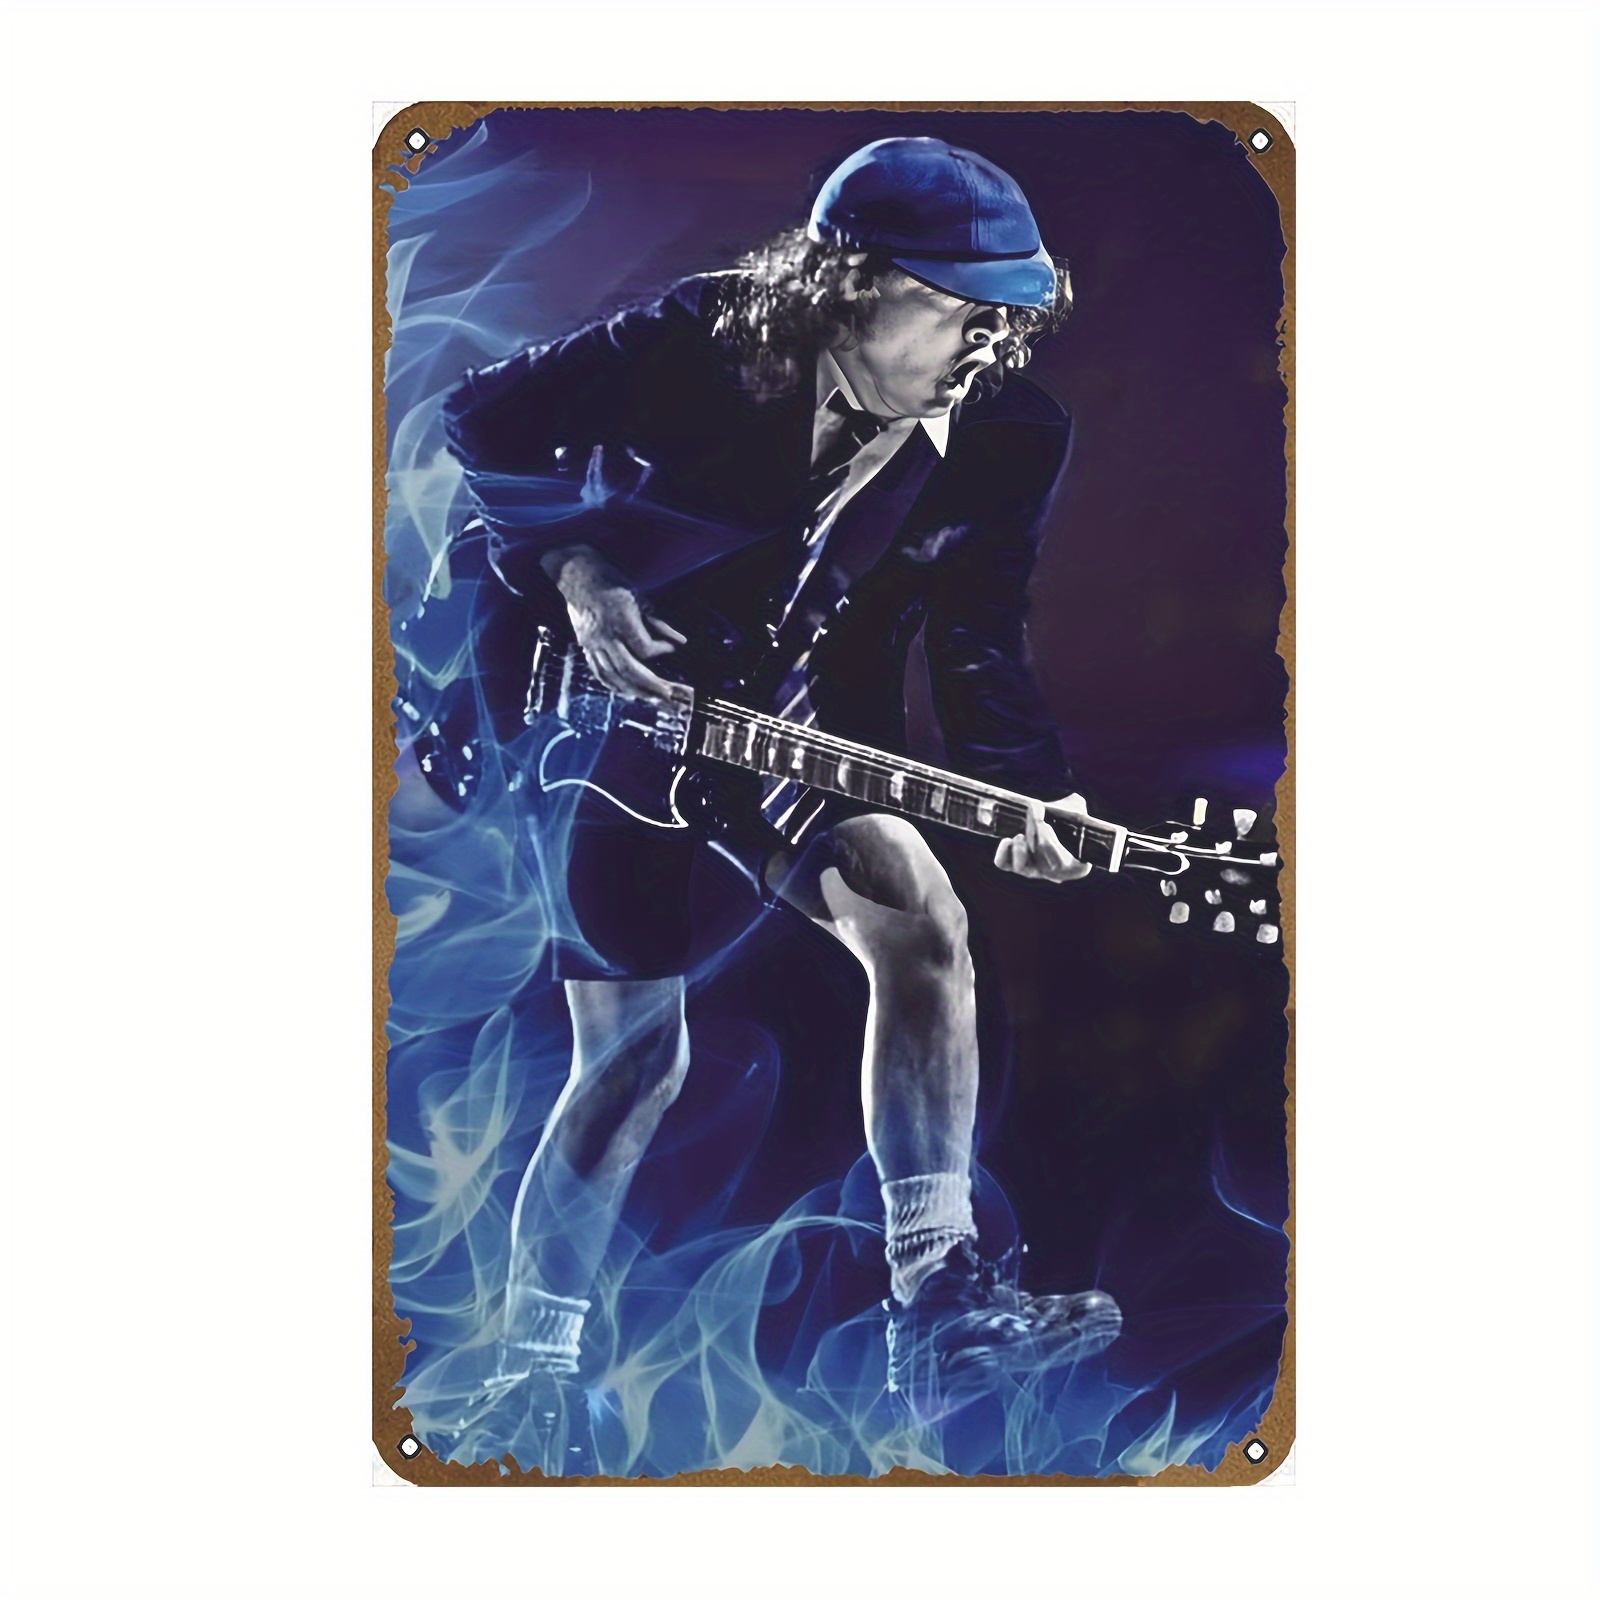 

Iron Metal Tin Sign Decor - Vintage Guitarist Rock Band Art Poster - Waterproof, Weather-resistant, Pre-drilled For Easy Hanging - Perfect For Bar, Cafe, Music Studio Wall - 8x12 Inches - Set Of 1